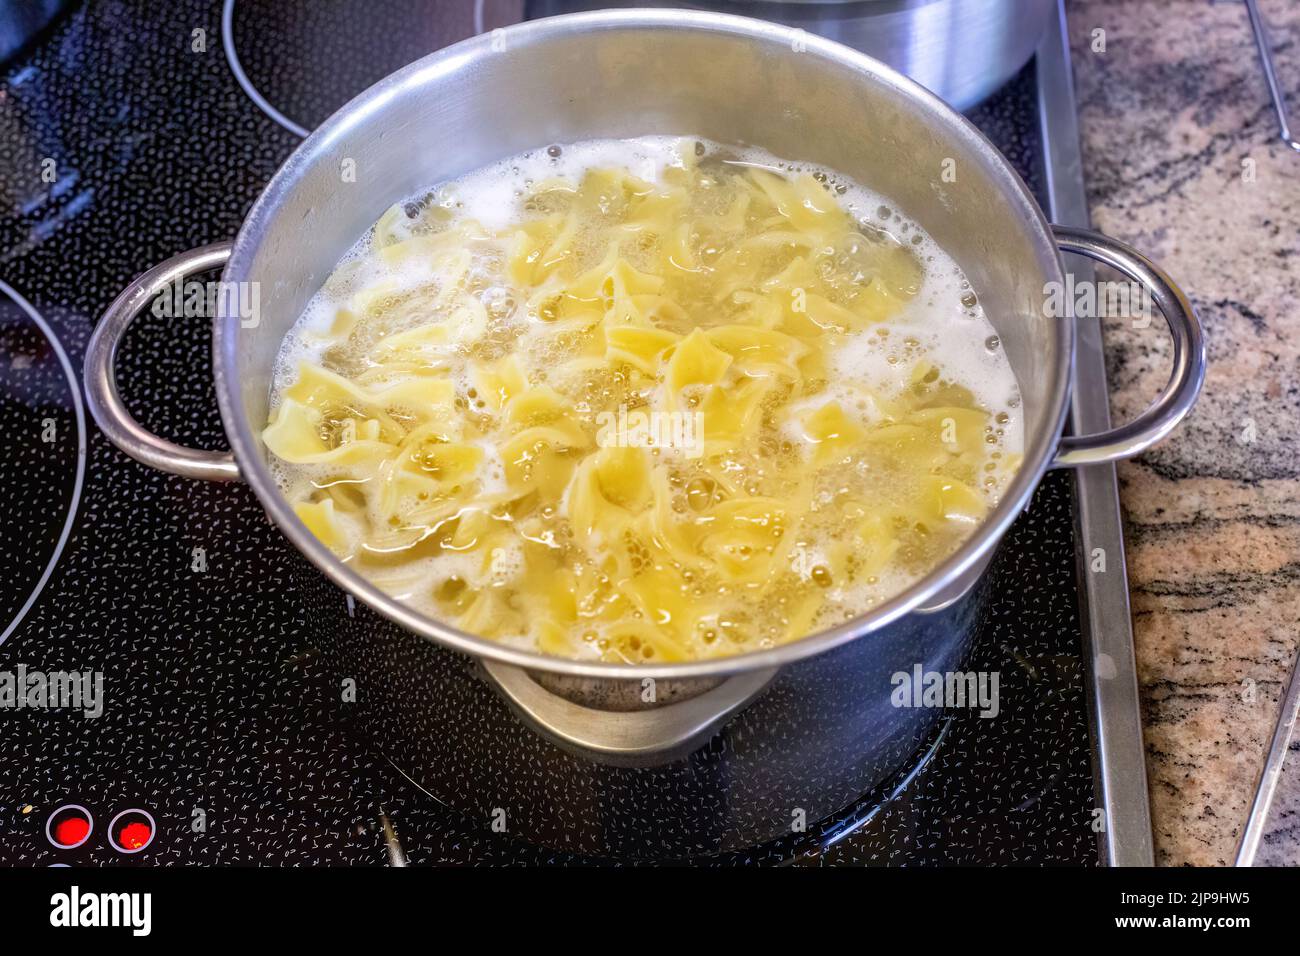 close-up of stove with pot and pasta Stock Photo